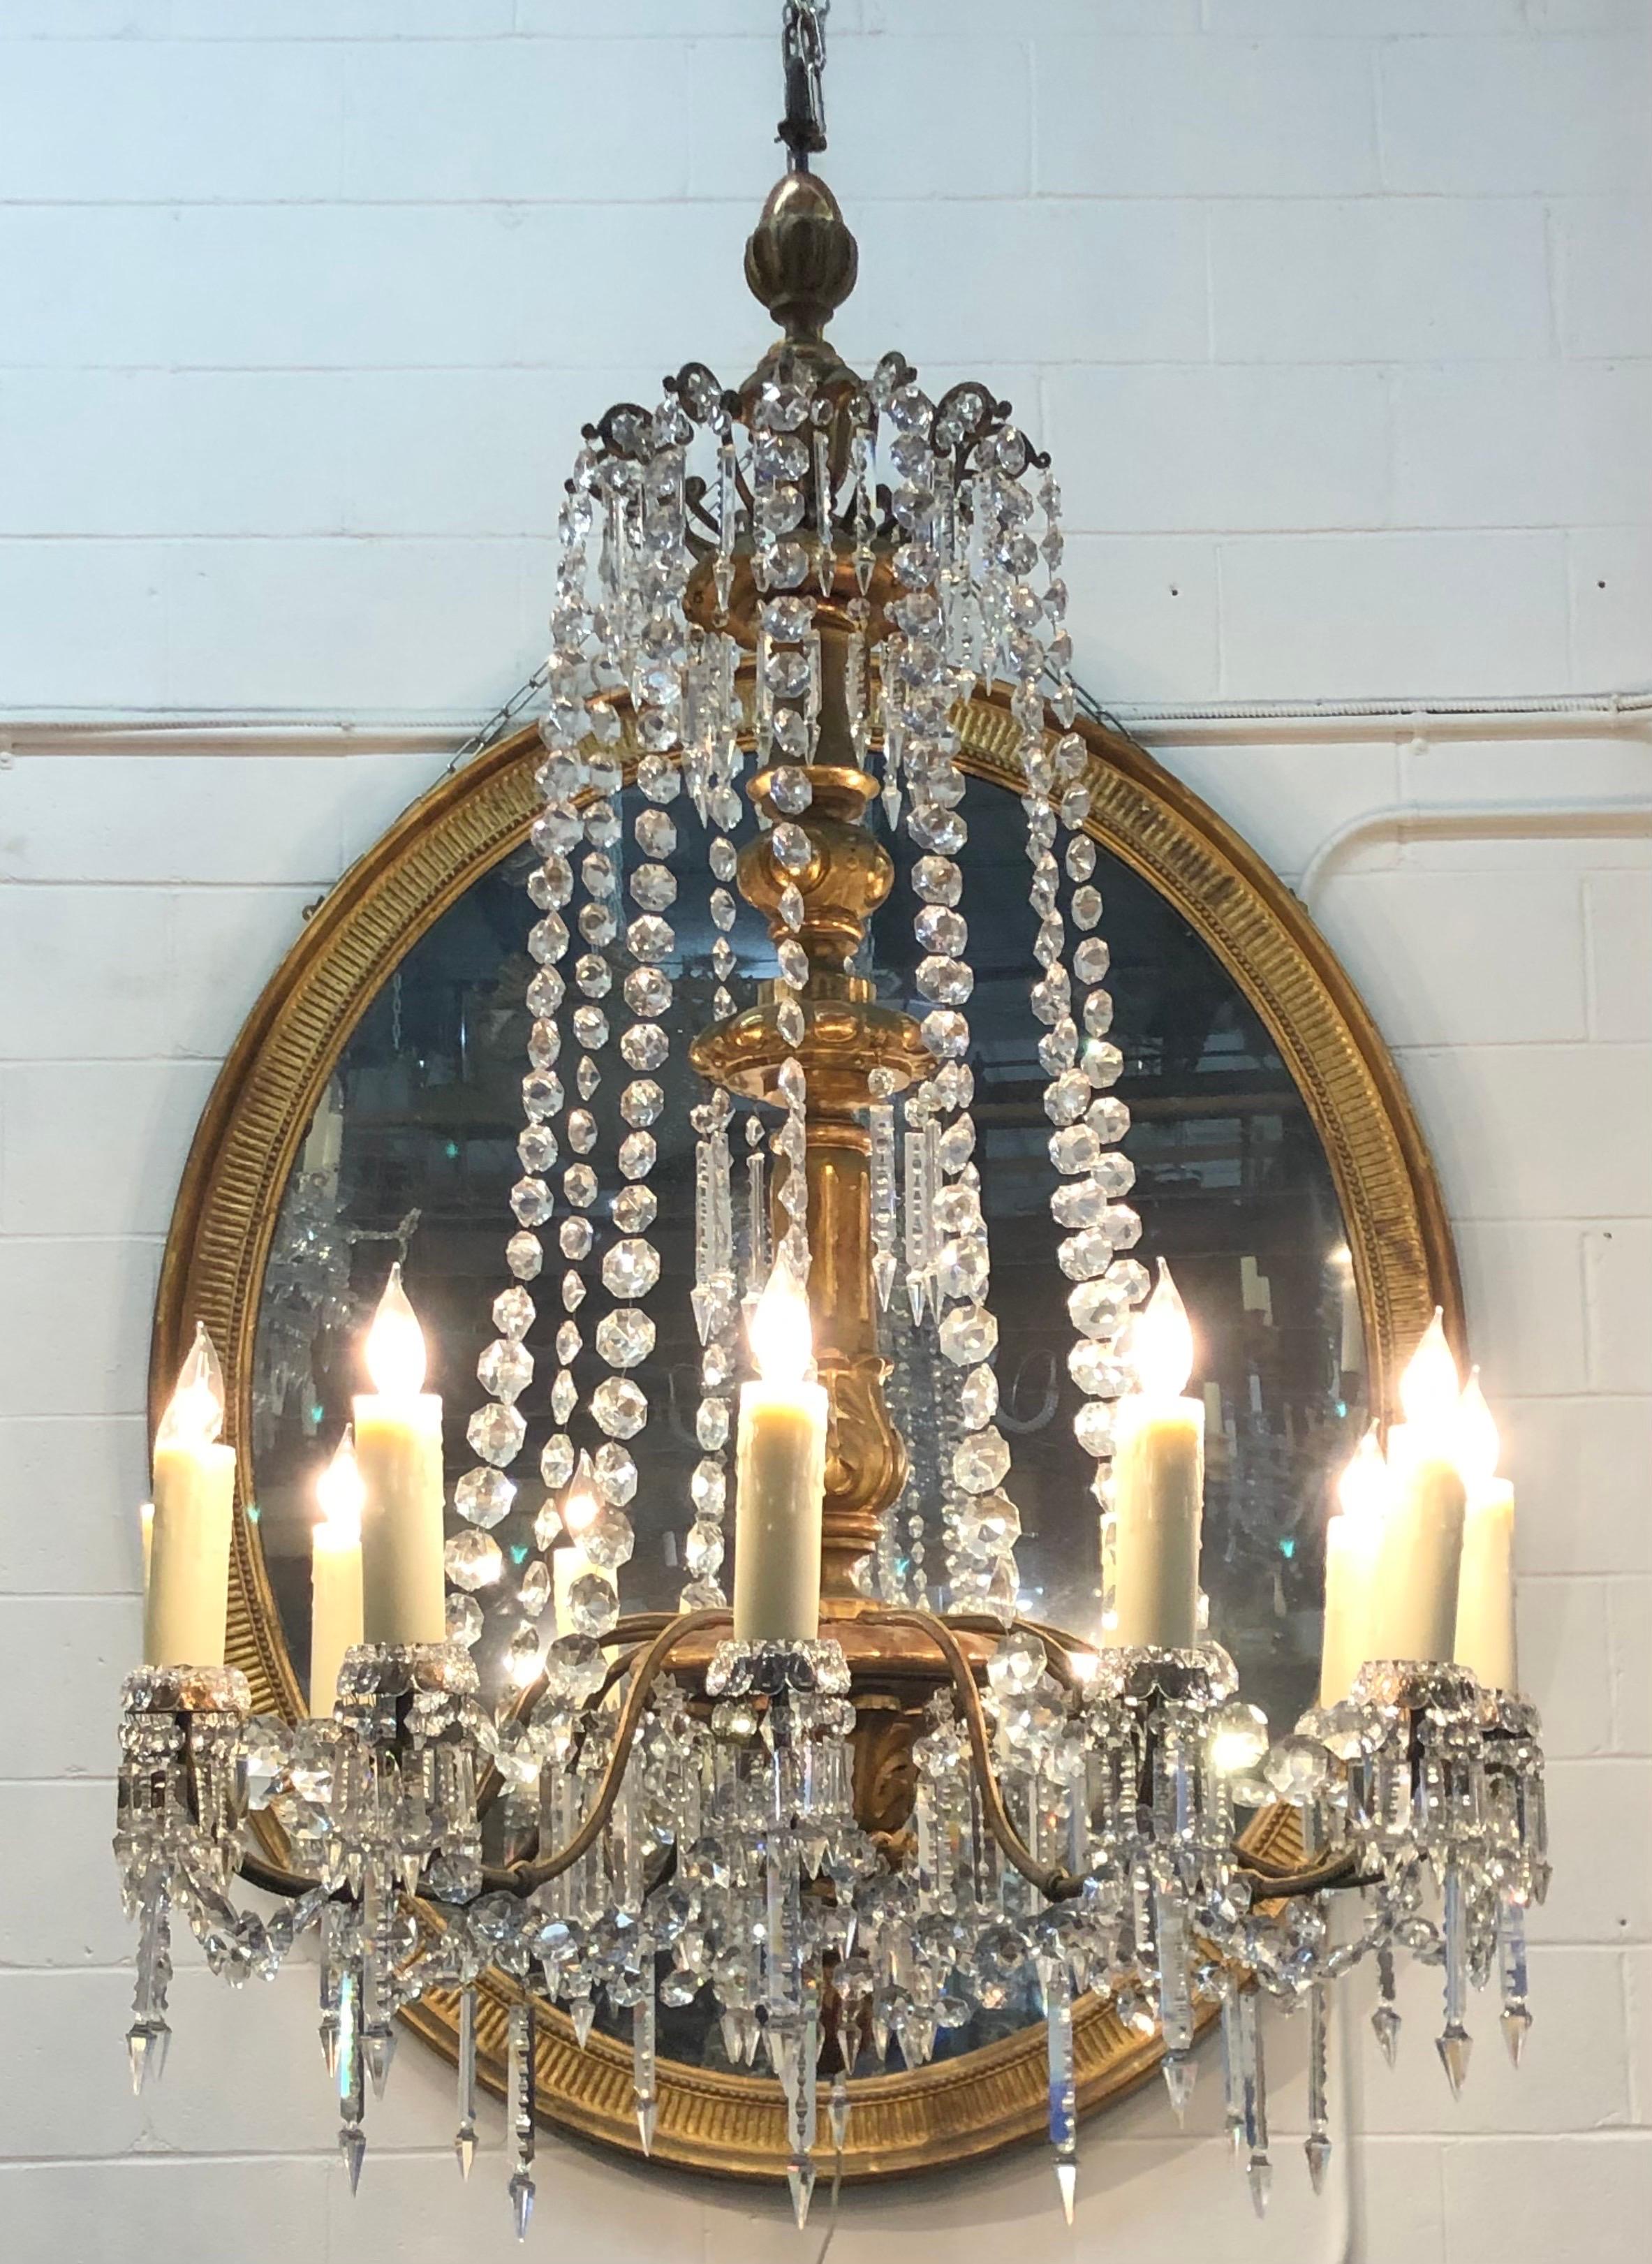 This Regal Monumental Louis XVI Period Giltwood, Bronze-Lacquer, Tôle, Wrought Iron & Crystal Chandelier was made in Italy in the 18th century. The elegant hand-carved Giltwood and Bronze-Lacquered Foliate Stem is carved with rings, fluting,